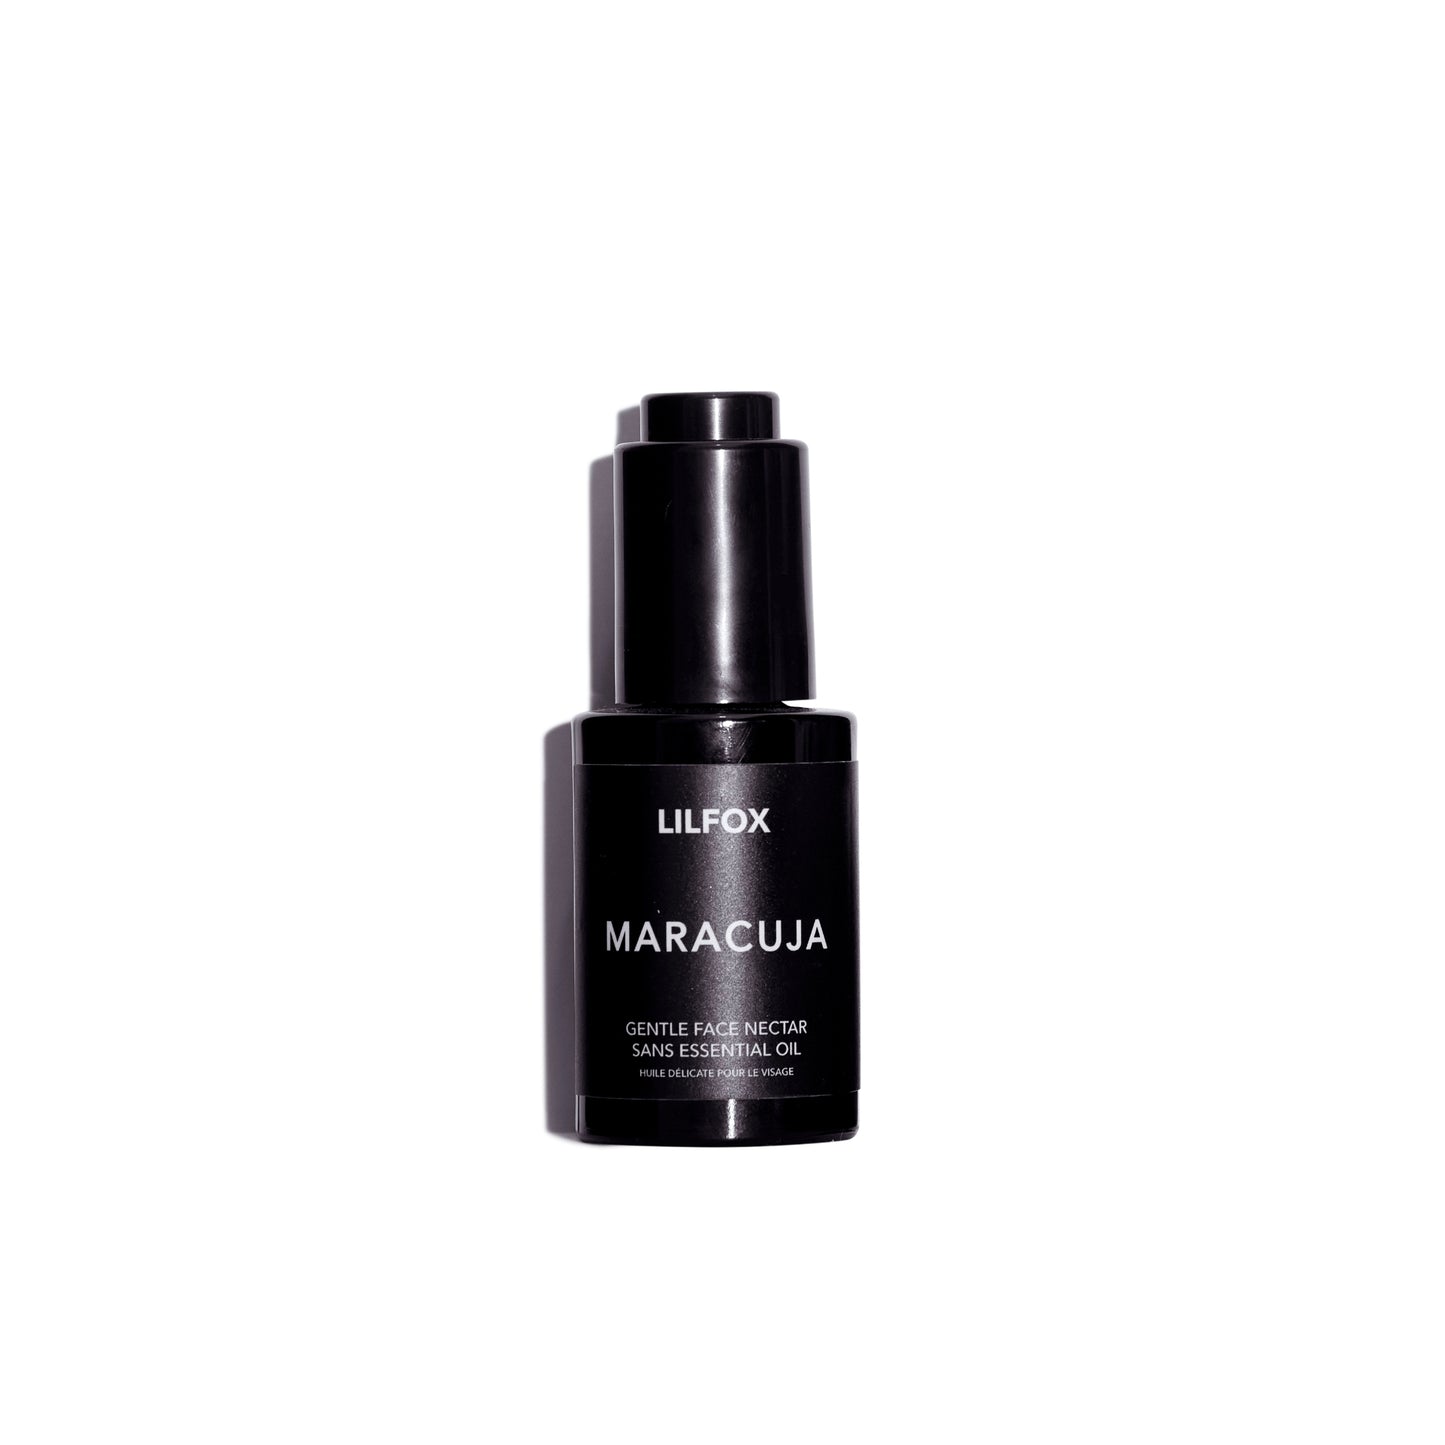 LILFOX MARACUJA FACE NECTAR Gentle EO Free new packaging